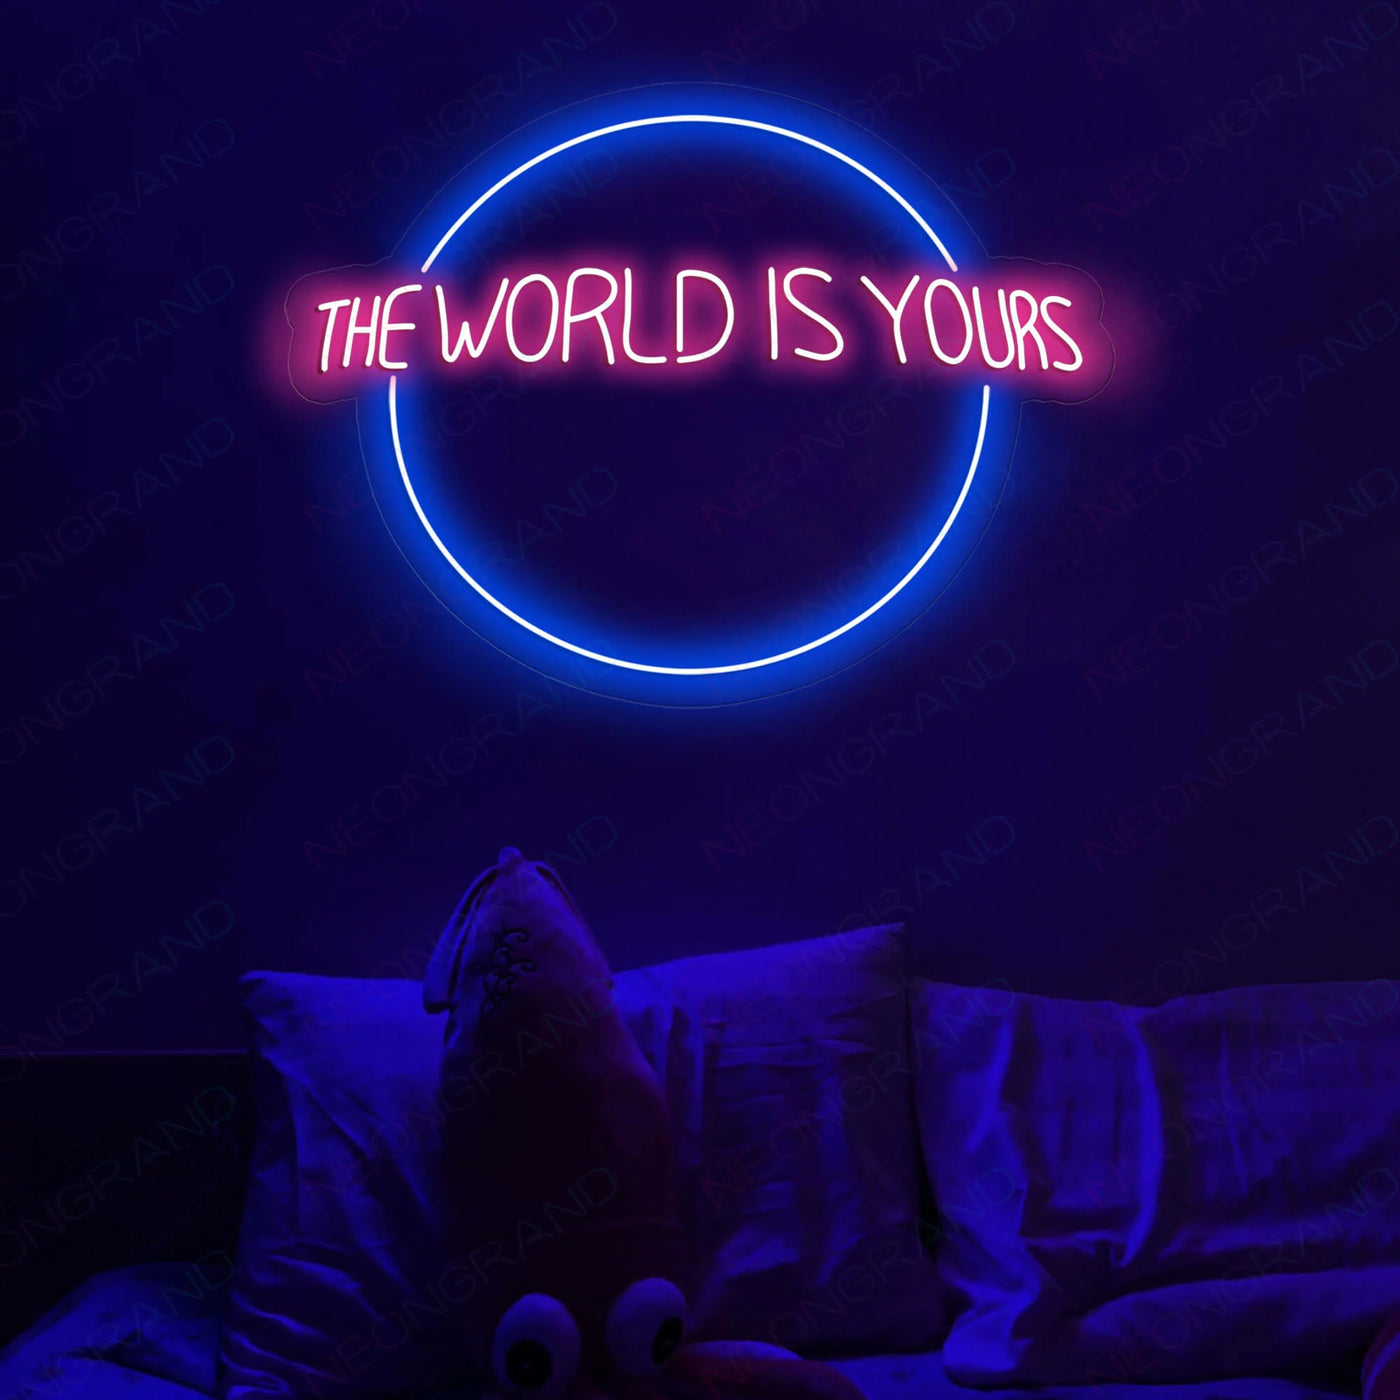 The World Is Yours Neon Sign 1 ELECTRIC BLUE NEON BLUE AESTHETIC